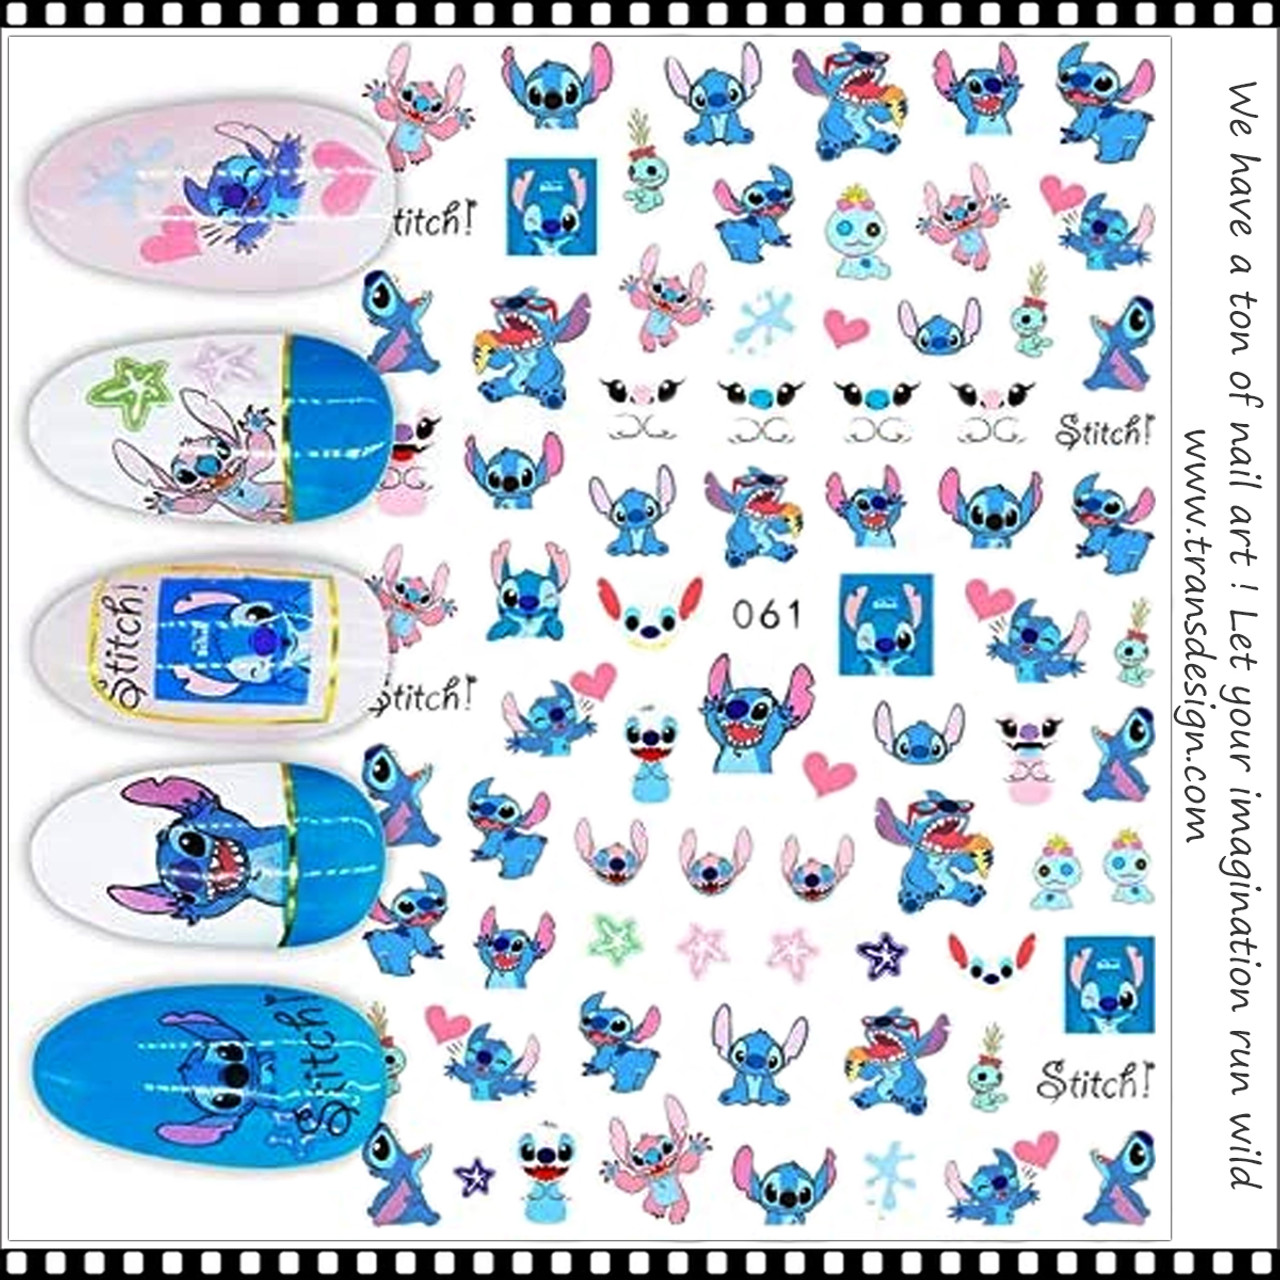 Lilo and Stitch Nail Art Stickers Transfers Decals Set of 64